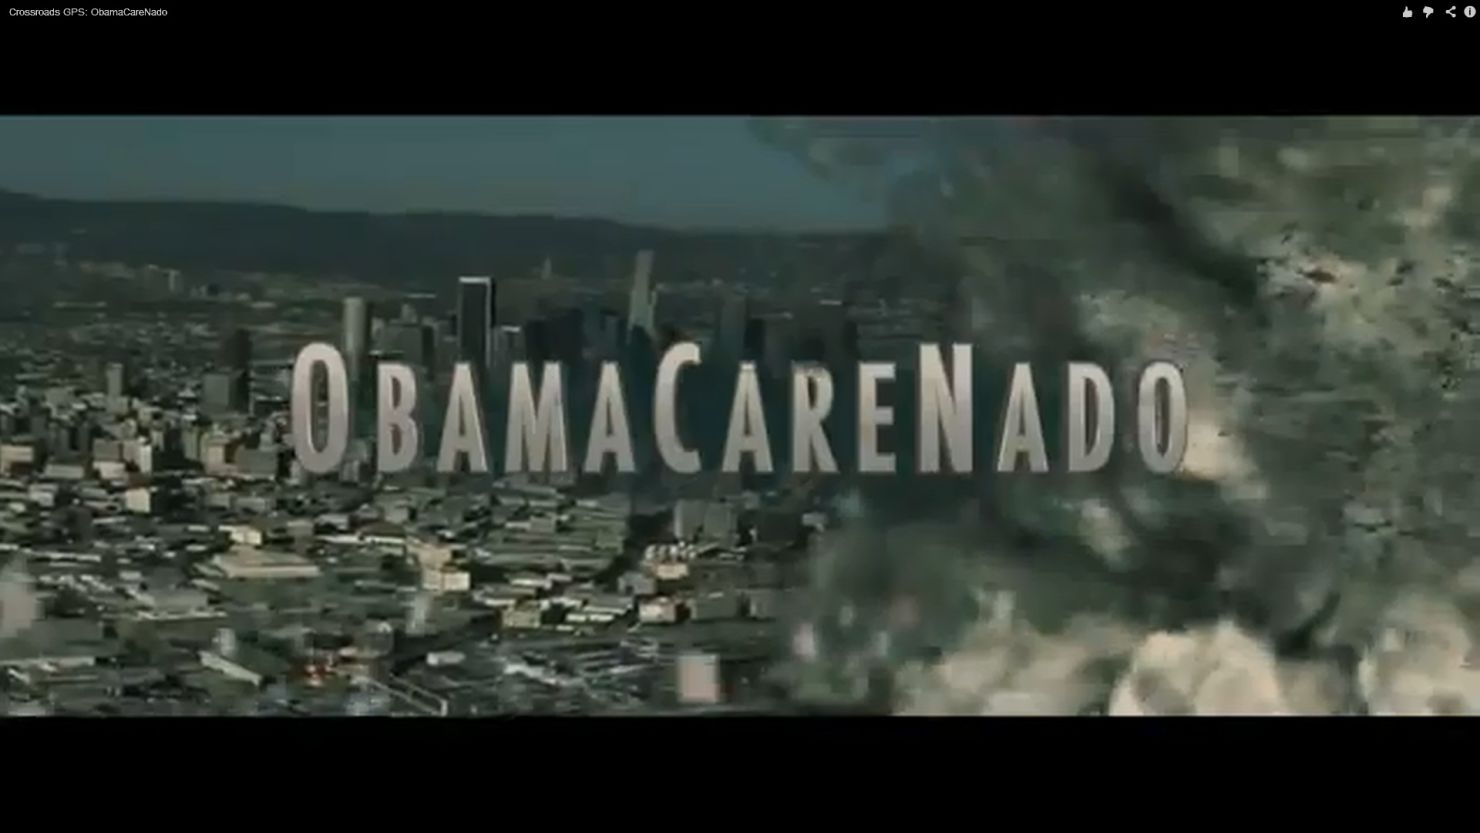 Dean Obeidallah says a lack of explanation of Obamacare has left room for critics to distort it, as in the "ObamaCareNado" ad.